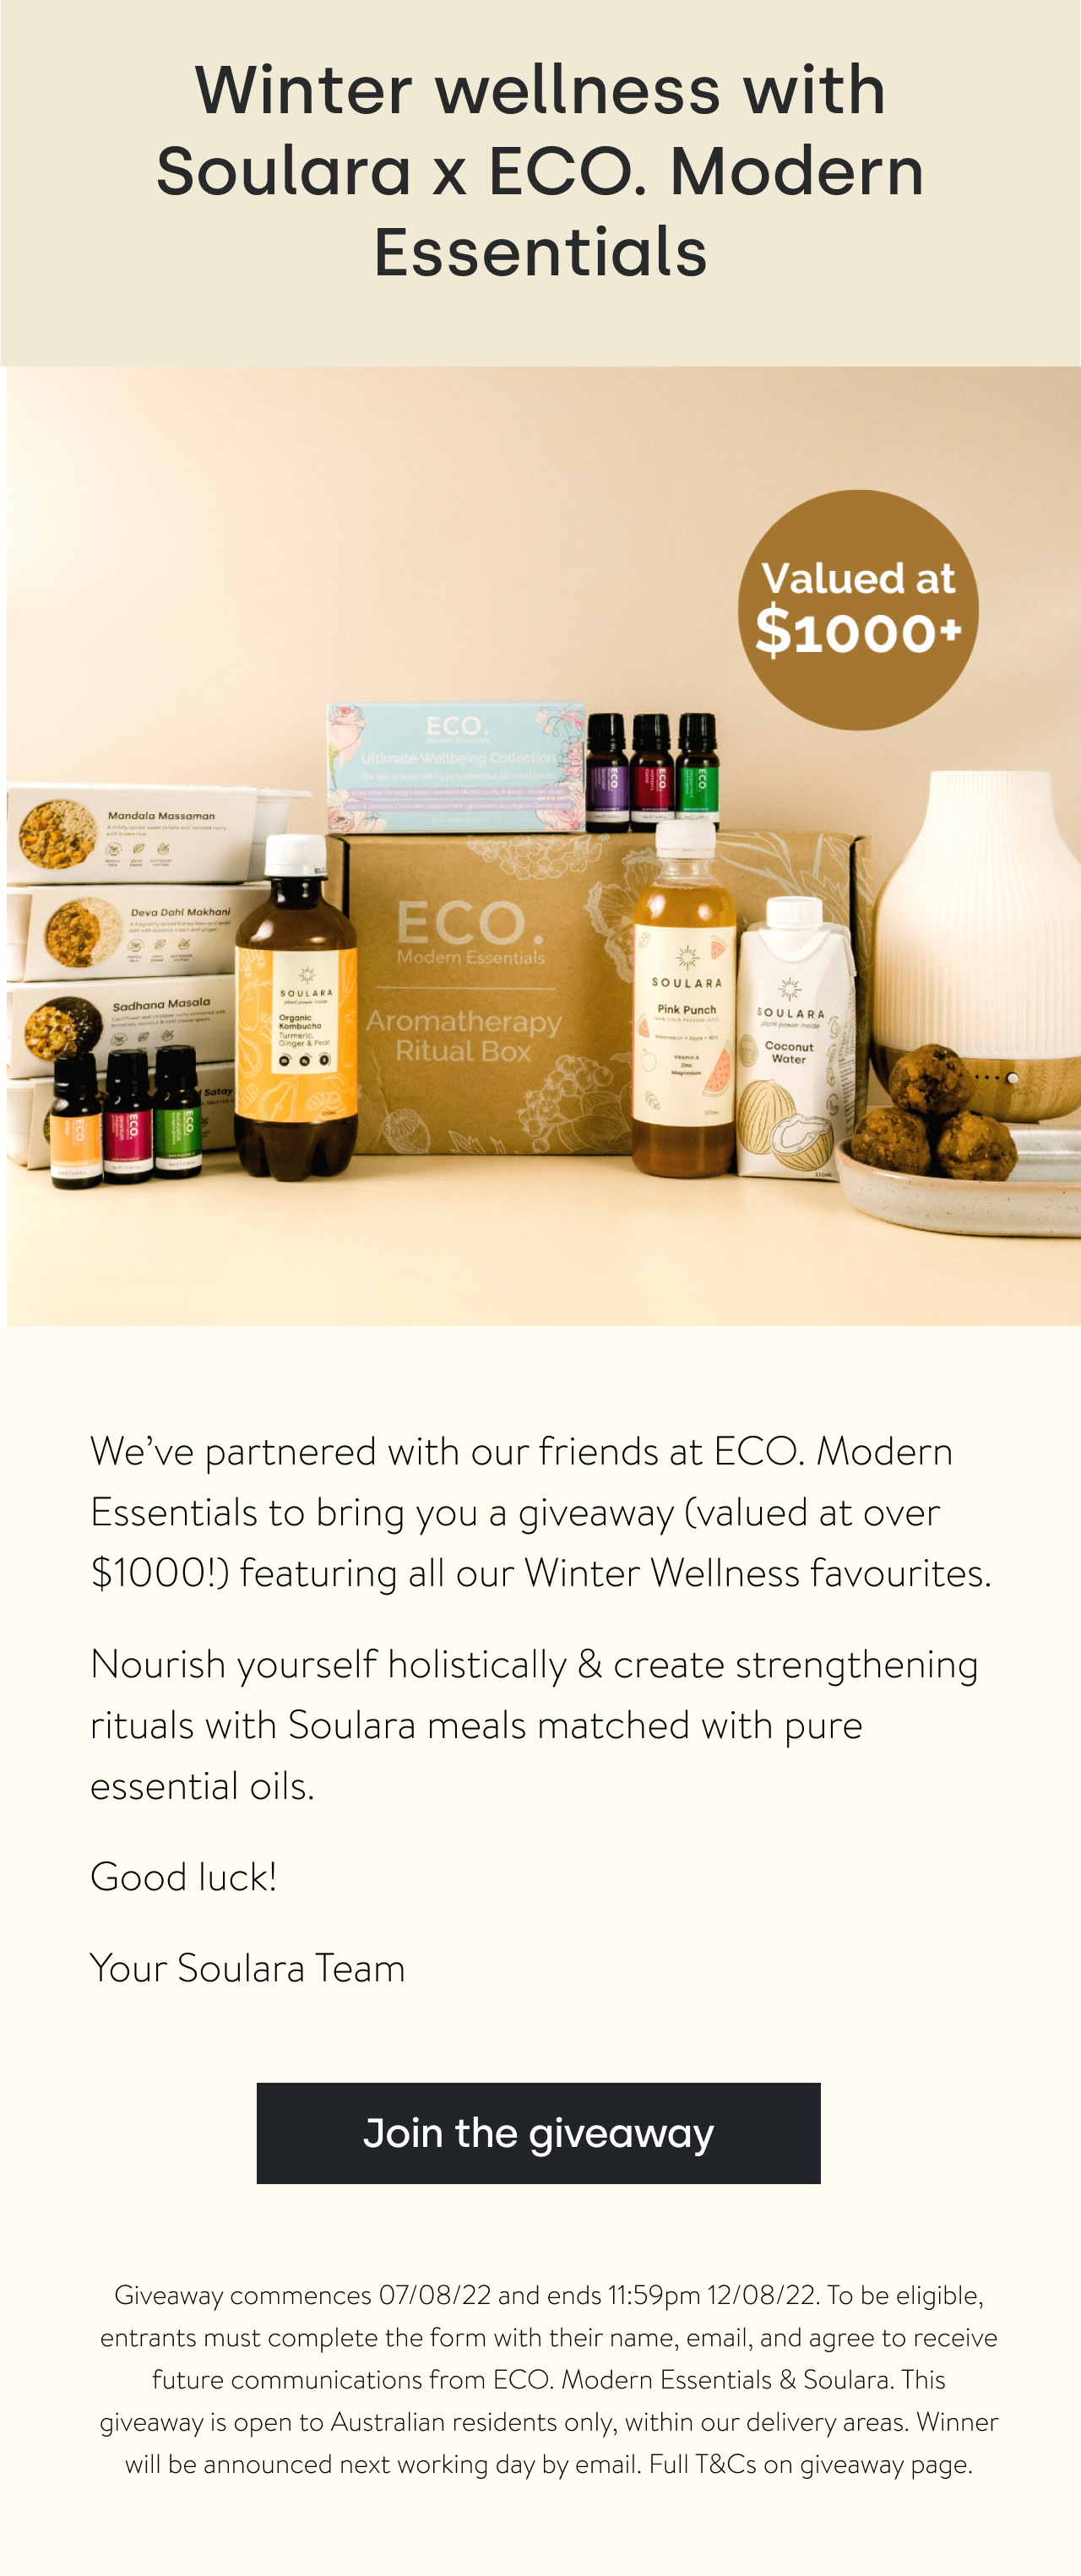 Soulara x ECO. Modern Essentials: Join the giveaway